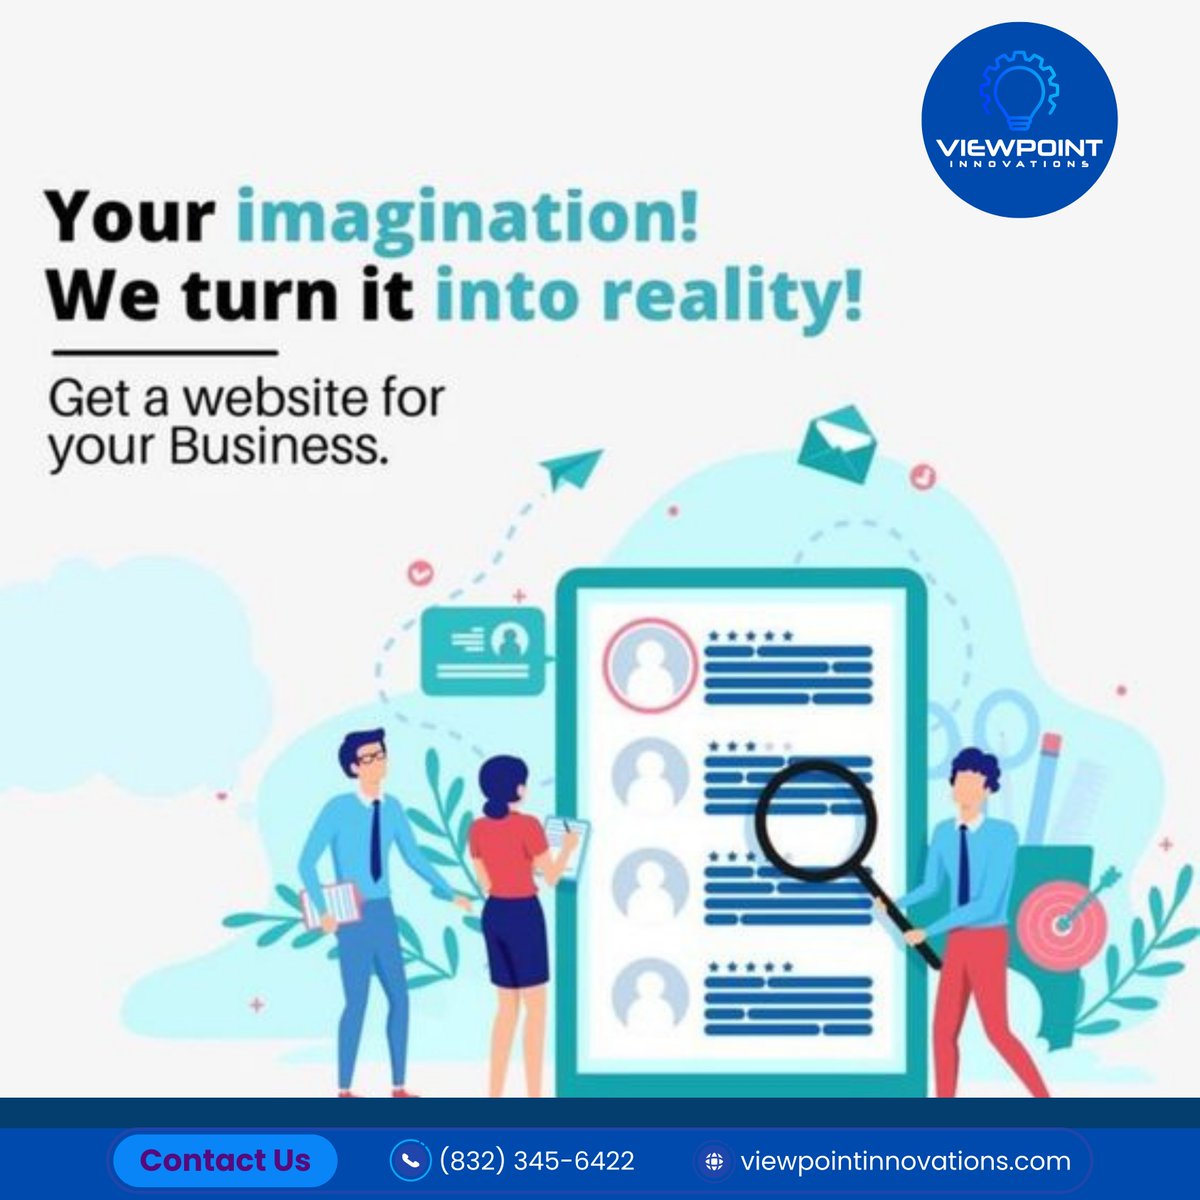 Your Website, Your Rules - Custom Web Solutions for Every Need. 
-
-
-
Visit our website
viewpointinnovations.com
#WebDesign #WebDevelopment #ResponsiveDesign #WebsiteCreation #WebsiteDevelopment #SearchEngineFriendly #SEOOptimized #KeywordRanking #BoostSales #AffordableDesign